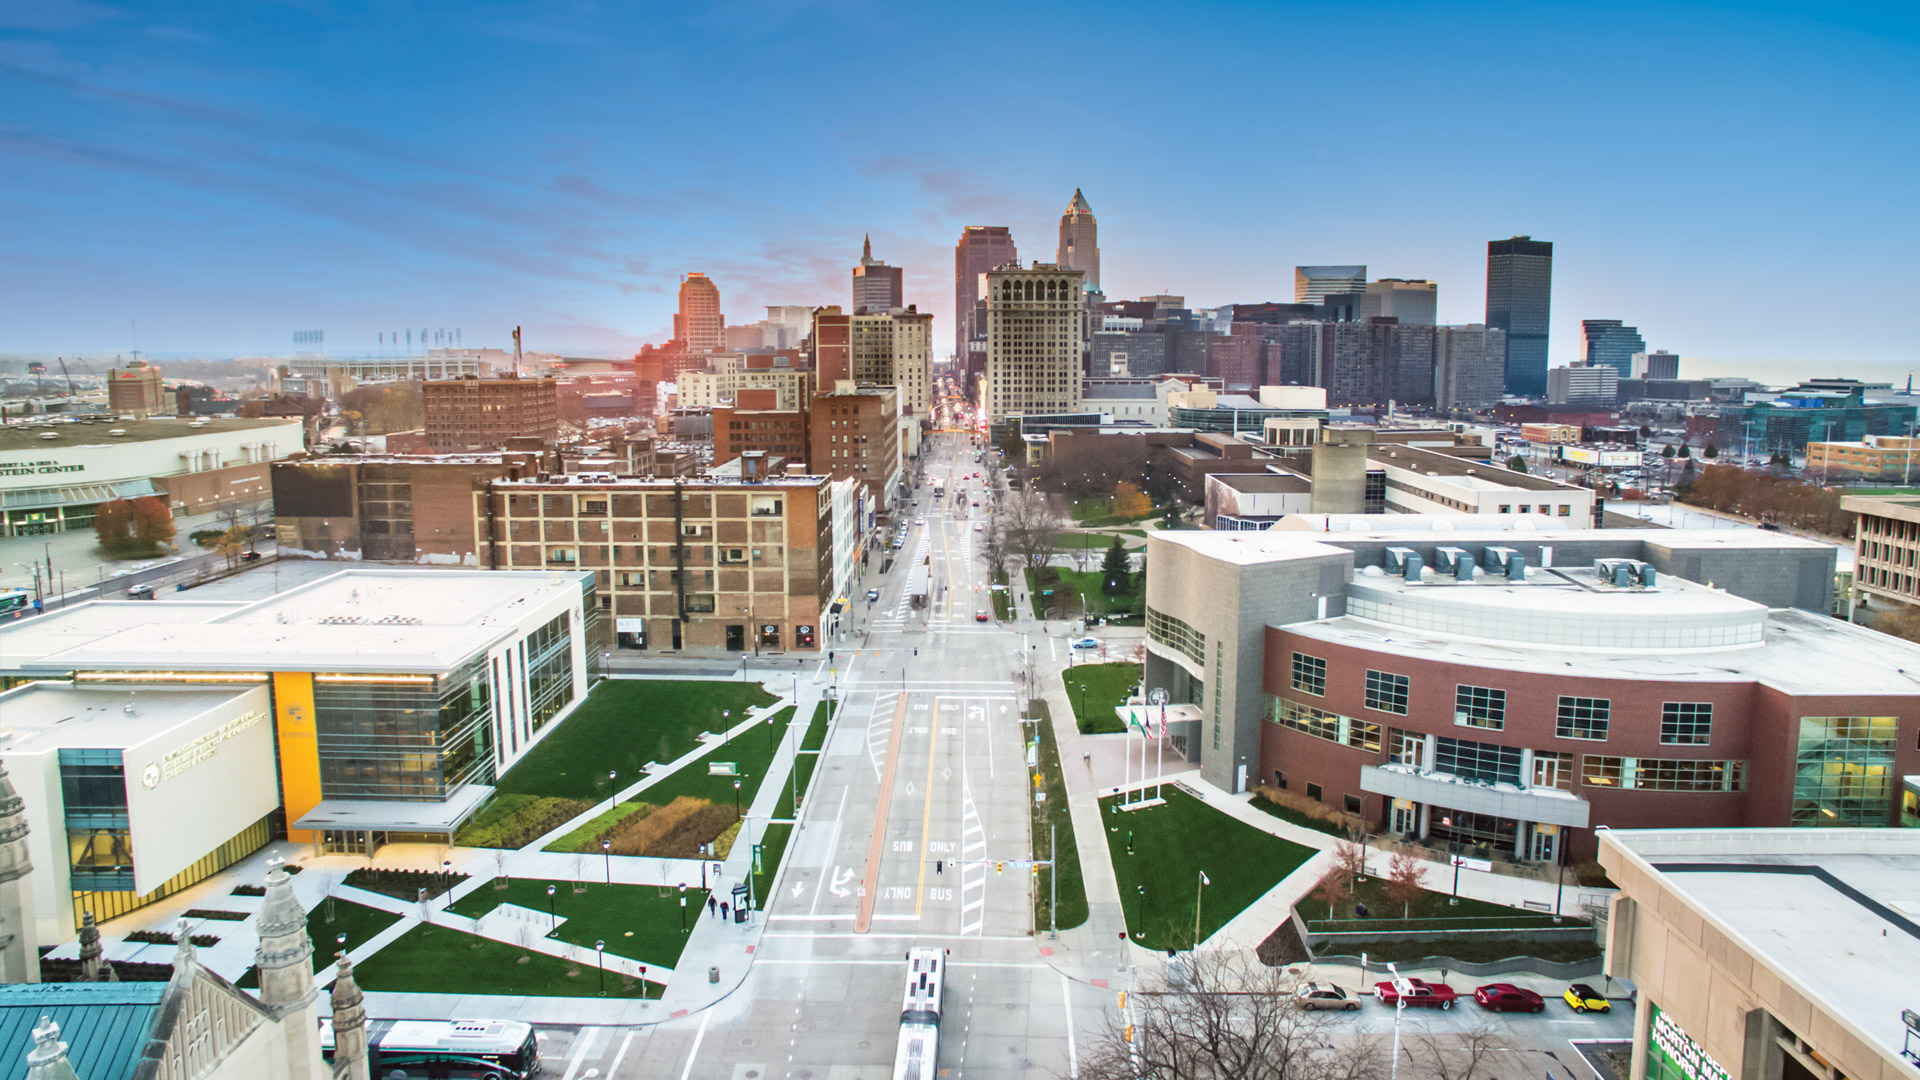 Ariel view of CSU campus in downtown Cleveland